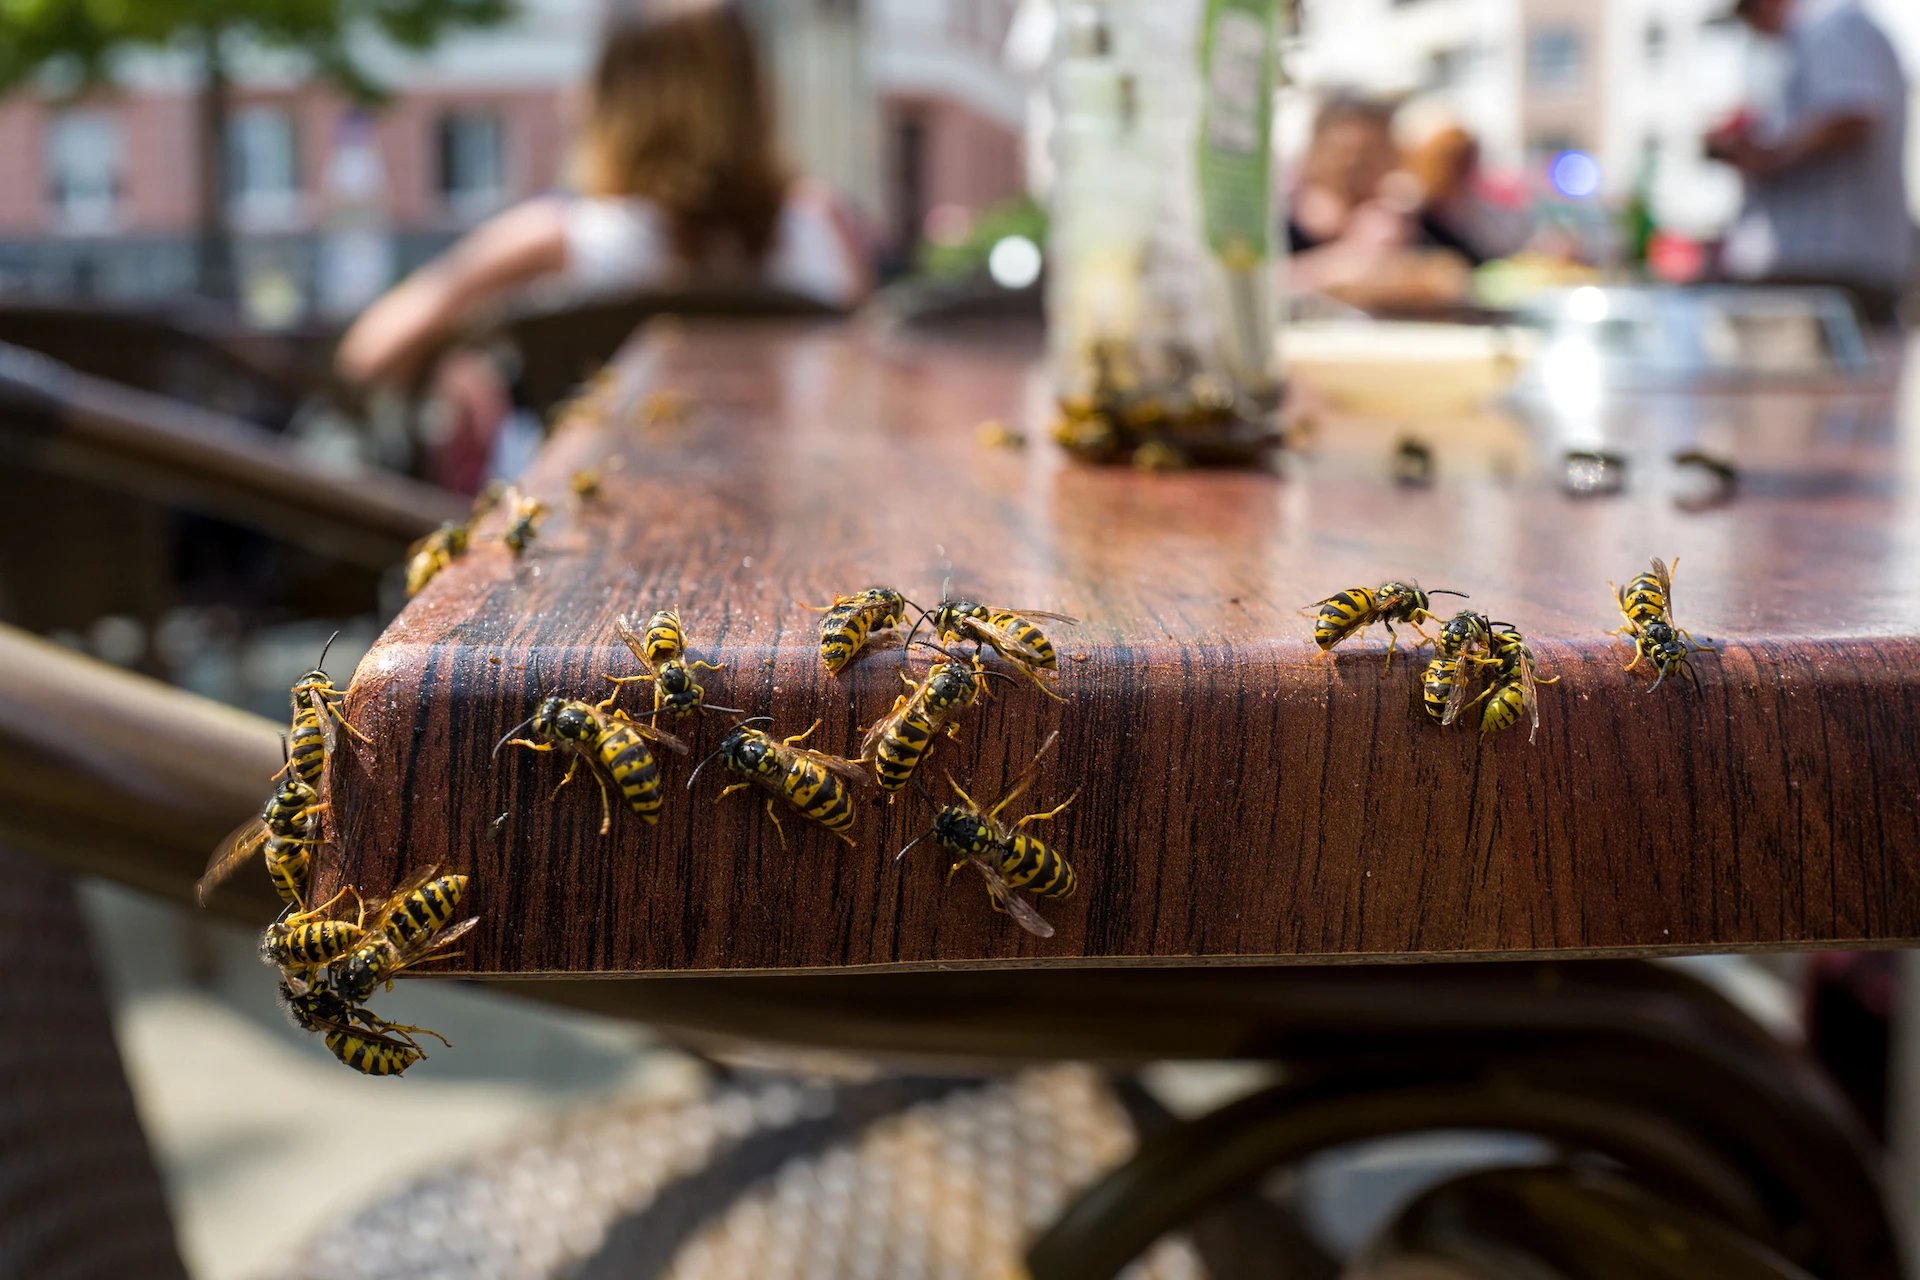 Why it appears there is an invasion of wasps near summer's end